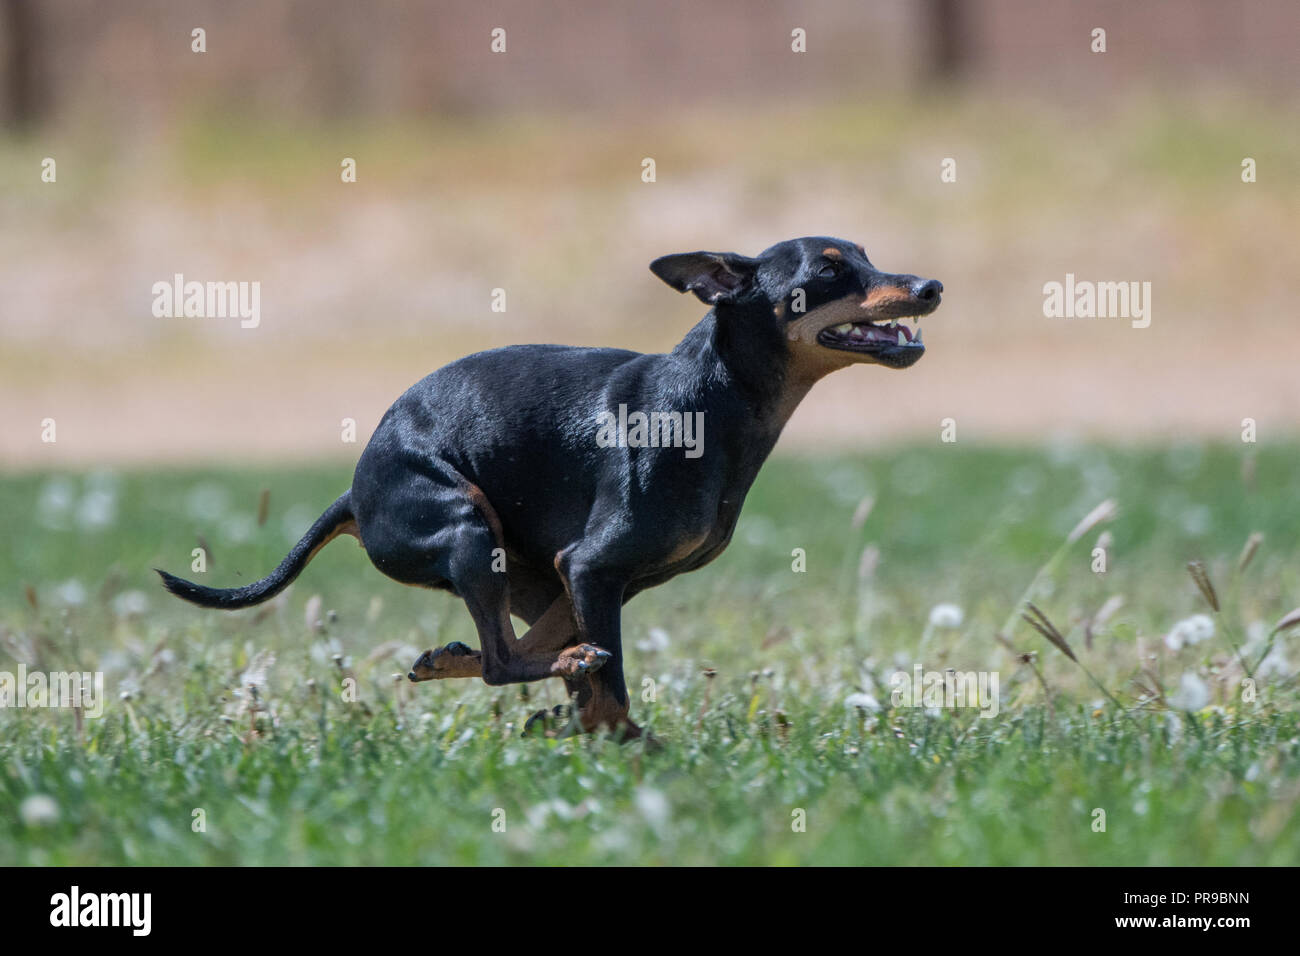 Small black dog doing lure course Stock Photo